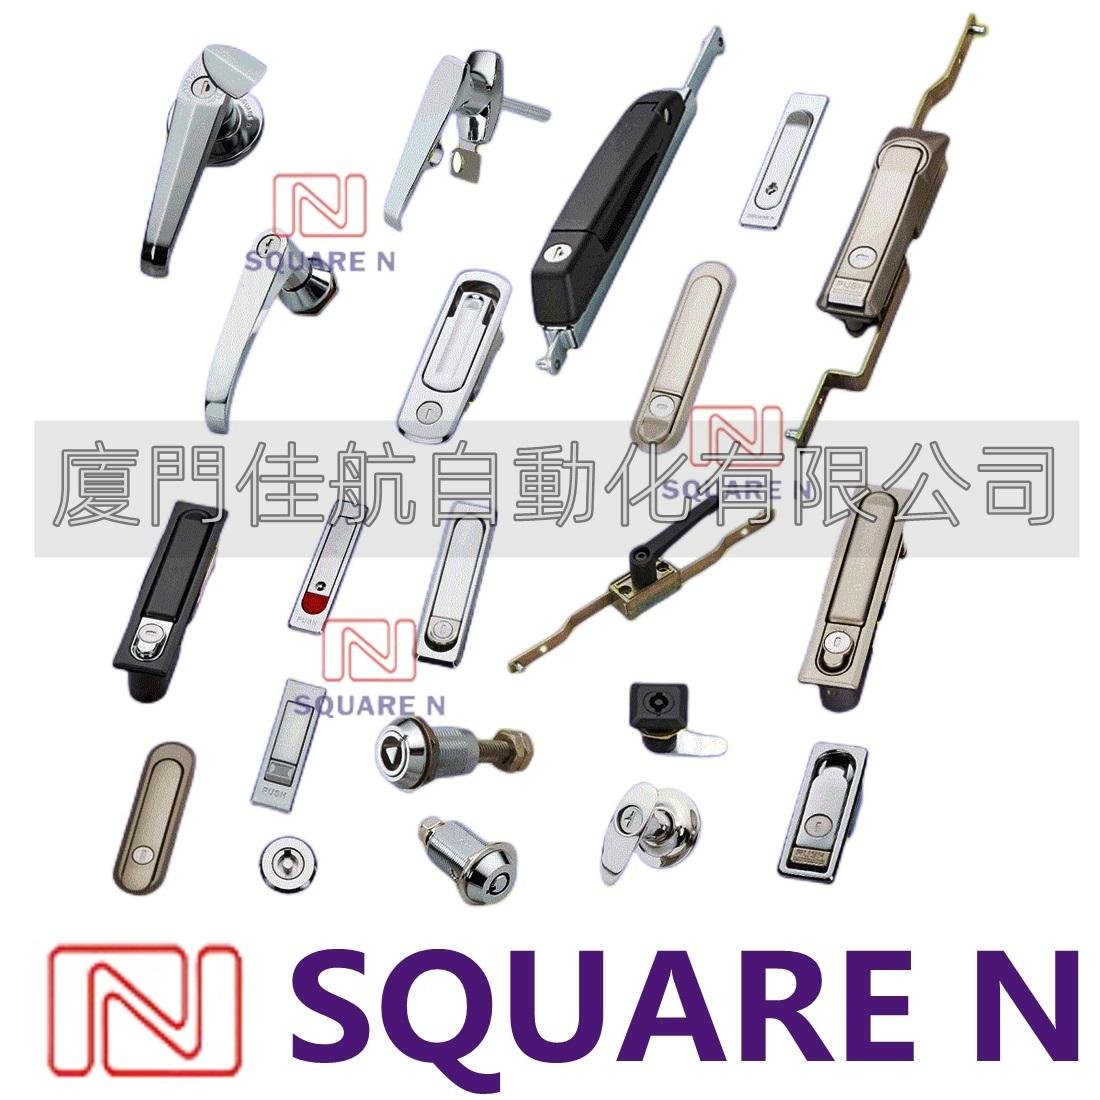 TAIWAN SQUARE N【SNA-240-2／SNA-240-3】Sandblast surface handle / Sandblast surface handle 【A-280】Hidden handle / Hidden handle 【SNB-150-2】Clamshell rotating handle 【SNB-150-3】Clamshell rotating handle 【SNB-150-1】 Clamshell rotating handle 【SNA-150-3】Clamshell rotating handle 【SNA-150-2】Clamshell rotating handle 【SNA-150-1】Clamshell rotating handle 【A-1505-2-A】Stainless steel flat hidden handle 【SNA-190-A】Close the handle 【SNA-190-AS】Close the handle 【A-380】Flat hidden handle 【A-860-4】Hidden handle (with padlock hole) 【A-860-3】Handle / handle 【A-680-HN】Hidden handle / Hidden handle 【A-490-3】Hidden handle / Hidden handle 【A-480-3】 Hidden handle / Hidden handle 【A-470-3】Hidden handle / Hidden handle 【A-661-4】Plane waterproof hidden handle 【A-360】Compression handle / Compression handle 【A-350-1-B / A-350-3-B】Compression handle / Compression handle 【A-350-A】Compression handle / Compression handle 【SNA-281】Hidden handle / Hidden handle 【SNA-242】 Plane tripping handle 【A-241-2-A／A-241-2-B】Flat handle / flat handle 【A-362／A-462】Waterproof hidden door handle /TAKIGEN A-480-A-1 A-480-A-3 Waterproof hidden door handle 【A-361】Flat handle / flat handle 【AP-505】Flat Plastic Handle / Flat Plastic Handle 【A-505】Hidden handle / Hidden handle 【A-461/SA-461】Hidden waterproof handle / Hidden waterproof handle SQUAREN TW